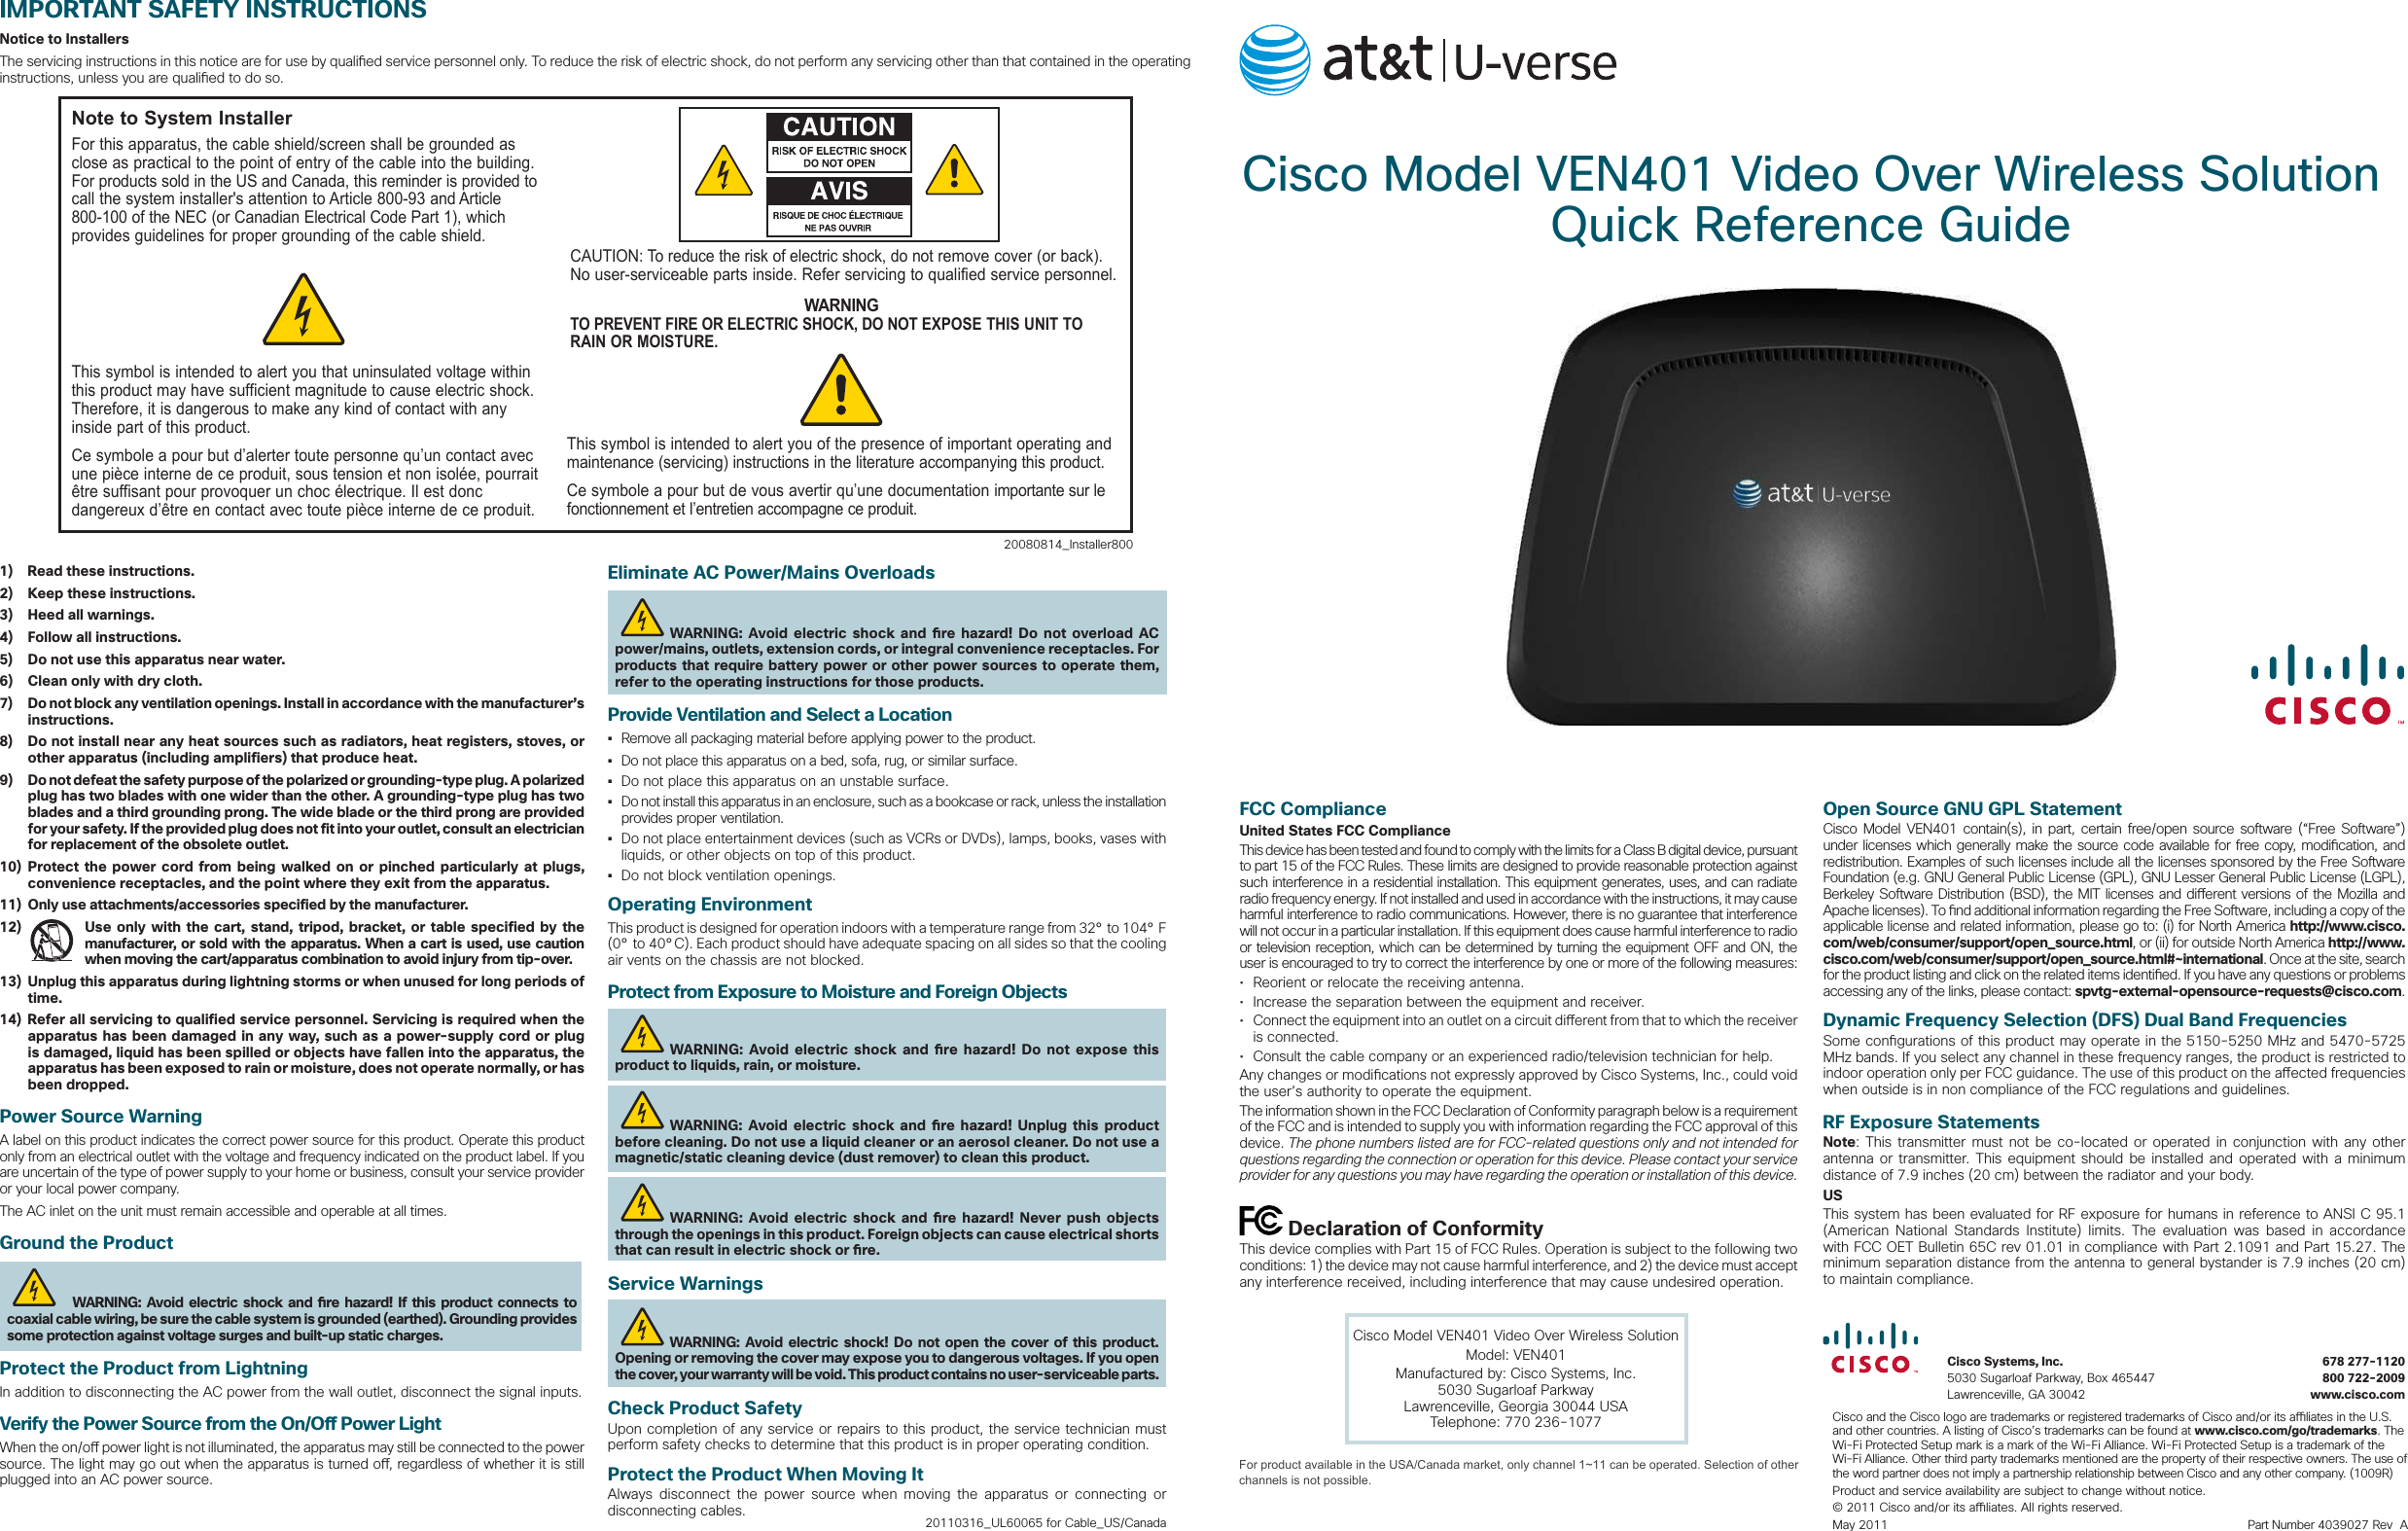  Cisco Model VEN401 Video Over Wireless Solution Quick Reference Guide  Cisco Systems, Inc.  678 277-1120  5030 Sugarloaf Parkway, Box 465447  800 722-2009  Lawrenceville, GA 30042  www.cisco.comCisco and the Cisco logo are trademarks or registered trademarks of Cisco and/or its a  liates in the U.S. and other countries. A listing of Cisco’s trademarks can be found at www.cisco.com/go/trademarks. The Wi-Fi Protected Setup mark is a mark of the Wi-Fi Alliance. Wi-Fi Protected Setup is a trademark of the Wi-Fi Alliance. Other third party trademarks mentioned are the property of their respective owners. The use of the word partner does not imply a partnership relationship between Cisco and any other company. (1009R)Product and service availability are subject to change without notice.© 2011 Cisco and/or its a  liates. All rights reserved.May 2011    Part Number 4039027 Rev  AIMPORTANT SAFETY INSTRUCTIONSNotice to InstallersThe servicing instructions in this notice are for use by quali ed service personnel only. To reduce the risk of electric shock, do not perform any servicing other than that contained in the operating instructions, unless you are quali ed to do so.20080814_Installer800Note to System InstallerFor this apparatus, the cable shield/screen shall be grounded as close as practical to the point of entry of the cable into the building. For products sold in the US and Canada, this reminder is provided to call the system installer&apos;s attention to Article 800-93 and Article 800-100 of the NEC (or Canadian Electrical Code Part 1), which provides guidelines for proper grounding of the cable shield.This symbol is intended to alert you that uninsulated voltage within this product may have sufficient magnitude to cause electric shock. Therefore, it is dangerous to make any kind of contact with any inside part of this product.Ce symbole a pour but d’alerter toute personne qu’un contact avec une pièce interne de ce produit, sous tension et non isolée, pourrait être suffisant pour provoquer un choc électrique. Il est donc dangereux d’être en contact avec toute pièce interne de ce produit.This symbol is intended to alert you of the presence of important operating and maintenance (servicing) instructions in the literature accompanying this product. Ce symbole a pour but de vous avertir qu’une documentation importante sur le fonctionnement et l’entretien accompagne ce produit.CAUTION: To reduce the risk of electric shock, do not remove cover (or back). No user-serviceable parts inside. Refer servicing to qualified service personnel.WARNINGTO PREVENT FIRE OR ELECTRIC SHOCK, DO NOT EXPOSE THIS UNIT TO RAIN OR MOISTURE.1)  Read these instructions.2)  Keep these instructions.3)  Heed all warnings.4)  Follow all instructions.5)  Do not use this apparatus near water.6)  Clean only with dry cloth.7)  Do not block any ventilation openings. Install in accordance with the manufacturer’s instructions.8)  Do not install near any heat sources such as radiators, heat registers, stoves, or other apparatus (including amplifiers) that produce heat.9)  Do not defeat the safety purpose of the polarized or grounding-type plug. A polarized plug has two blades with one wider than the other. A grounding-type plug has two blades and a third grounding prong. The wide blade or the third prong are provided for your safety. If the provided plug does not fit into your outlet, consult an electrician for replacement of the obsolete outlet.10) Protect the power cord from being walked on or pinched particularly at plugs, convenience receptacles, and the point where they exit from the apparatus.11)  Only use attachments/accessories specified by the manufacturer.12)  Use only with the cart, stand, tripod, bracket, or table specified by the manufacturer, or sold with the apparatus. When a cart is used, use caution when moving the cart/apparatus combination to avoid injury from tip-over.13)  Unplug this apparatus during lightning storms or when unused for long periods of time.14)  Refer all servicing to qualified service personnel. Servicing is required when the apparatus has been damaged in any way, such as a power-supply cord or plug is damaged, liquid has been spilled or objects have fallen into the apparatus, the apparatus has been exposed to rain or moisture, does not operate normally, or has been dropped.Power Source WarningA label on this product indicates the correct power source for this product. Operate this product only from an electrical outlet with the voltage and frequency indicated on the product label. If you are uncertain of the type of power supply to your home or business, consult your service provider or your local power company.The AC inlet on the unit must remain accessible and operable at all times.Ground the Product  WARNING: Avoid electric shock and  re hazard! If this product connects to coaxial cable wiring, be sure the cable system is grounded (earthed). Grounding provides some protection against voltage surges and built-up static charges.Protect the Product from LightningIn addition to disconnecting the AC power from the wall outlet, disconnect the signal inputs.Verify the Power Source from the On/O  Power LightWhen the on/o  power light is not illuminated, the apparatus may still be connected to the power source. The light may go out when the apparatus is turned o , regardless of whether it is still plugged into an AC power source.      Eliminate AC Power/Mains OverloadsWARNING: Avoid electric shock and  re hazard! Do not overload AC power/mains, outlets, extension cords, or integral convenience receptacles. For products that require battery power or other power sources to operate them, refer to the operating instructions for those products.Provide Ventilation and Select a Location•  Remove all packaging material before applying power to the product. •  Do not place this apparatus on a bed, sofa, rug, or similar surface.•  Do not place this apparatus on an unstable surface.•  Do not install this apparatus in an enclosure, such as a bookcase or rack, unless the installation provides proper ventilation.•  Do not place entertainment devices (such as VCRs or DVDs), lamps, books, vases with liquids, or other objects on top of this product.•  Do not block ventilation openings.Operating EnvironmentThis product is designed for operation indoors with a temperature range from 32° to 104° F (0° to 40°C). Each product should have adequate spacing on all sides so that the cooling air vents on the chassis are not blocked.Protect from Exposure to Moisture and Foreign ObjectsWARNING: Avoid electric shock and  re hazard! Do not expose this product to liquids, rain, or moisture.WARNING: Avoid electric shock and  re hazard! Unplug this product before cleaning. Do not use a liquid cleaner or an aerosol cleaner. Do not use a magnetic/static cleaning device (dust remover) to clean this product.WARNING: Avoid electric shock and  re hazard! Never push objects through the openings in this product. Foreign objects can cause electrical shorts that can result in electric shock or  re. Service WarningsWARNING: Avoid electric shock! Do not open the cover of this product. Opening or removing the cover may expose you to dangerous voltages. If you open the cover, your warranty will be void. This product contains no user-serviceable parts.Check Product SafetyUpon completion of any service or repairs to this product, the service technician must perform safety checks to determine that this product is in proper operating condition.Protect the Product When Moving ItAlways disconnect the power source when moving the apparatus or connecting or disconnecting cables.  20110316_UL60065 for Cable_US/CanadaFCC ComplianceUnited States FCC ComplianceThis device has been tested and found to comply with the limits for a Class B digital device, pursuant to part 15 of the FCC Rules. These limits are designed to provide reasonable protection against such interference in a residential installation. This equipment generates, uses, and can radiate radio frequency energy. If not installed and used in accordance with the instructions, it may cause harmful interference to radio communications. However, there is no guarantee that interference will not occur in a particular installation. If this equipment does cause harmful interference to radio or television reception, which can be determined by turning the equipment OFF and ON, the user is encouraged to try to correct the interference by one or more of the following measures:•  Reorient or relocate the receiving antenna.•  Increase the separation between the equipment and receiver.•  Connect the equipment into an outlet on a circuit di erent from that to which the receiver is connected.•  Consult the cable company or an experienced radio/television technician for help.Any changes or modi cations not expressly approved by Cisco Systems, Inc., could void the user’s authority to operate the equipment.The information shown in the FCC Declaration of Conformity paragraph below is a requirement of the FCC and is intended to supply you with information regarding the FCC approval of this device. The phone numbers listed are for FCC-related questions only and not intended for questions regarding the connection or operation for this device. Please contact your service provider for any questions you may have regarding the operation or installation of this device. Declaration of ConformityThis device complies with Part 15 of FCC Rules. Operation is subject to the following two conditions: 1) the device may not cause harmful interference, and 2) the device must accept any interference received, including interference that may cause undesired operation.Cisco Model VEN401 Video Over Wireless SolutionModel: VEN401Manufactured by: Cisco Systems, Inc.5030 Sugarloaf ParkwayLawrenceville, Georgia 30044 USATelephone: 770 236-1077Open Source GNU GPL StatementCisco Model VEN401 contain(s), in part, certain free/open source software (“Free Software”) under licenses which generally make the source code available for free copy, modi cation, and redistribution. Examples of such licenses include all the licenses sponsored by the Free Software Foundation (e.g. GNU General Public License (GPL), GNU Lesser General Public License (LGPL), Berkeley Software Distribution (BSD), the MIT licenses and di erent versions of the Mozilla and Apache licenses). To  nd additional information regarding the Free Software, including a copy of the applicable license and related information, please go to: (i) for North America http://www.cisco.com/web/consumer/support/open_source.html, or (ii) for outside North America http://www.cisco.com/web/consumer/support/open_source.html#~international. Once at the site, search for the product listing and click on the related items identi ed. If you have any questions or problems accessing any of the links, please contact: spvtg-external-opensource-requests@cisco.com.Dynamic Frequency Selection (DFS) Dual Band Frequencies Some con gurations of this product may operate in the 5150-5250 MHz and 5470-5725 MHz bands. If you select any channel in these frequency ranges, the product is restricted to indoor operation only per FCC guidance. The use of this product on the a ected frequencies when outside is in non compliance of the FCC regulations and guidelines. RF Exposure Statements Note: This transmitter must not be co-located or operated in conjunction with any other antenna or transmitter. This equipment should be installed and operated with a minimum distance of 7.9 inches (20 cm) between the radiator and your body. US This system has been evaluated for RF exposure for humans in reference to ANSI C 95.1 (American National Standards Institute) limits. The evaluation was based in accordance with FCC OET Bulletin 65C rev 01.01 in compliance with Part 2.1091 and Part 15.27. The minimum separation distance from the antenna to general bystander is 7.9 inches (20 cm) to maintain compliance.For product available in the USA/Canada market, only channel 1~11 can be operated. Selection of other channels is not possible.